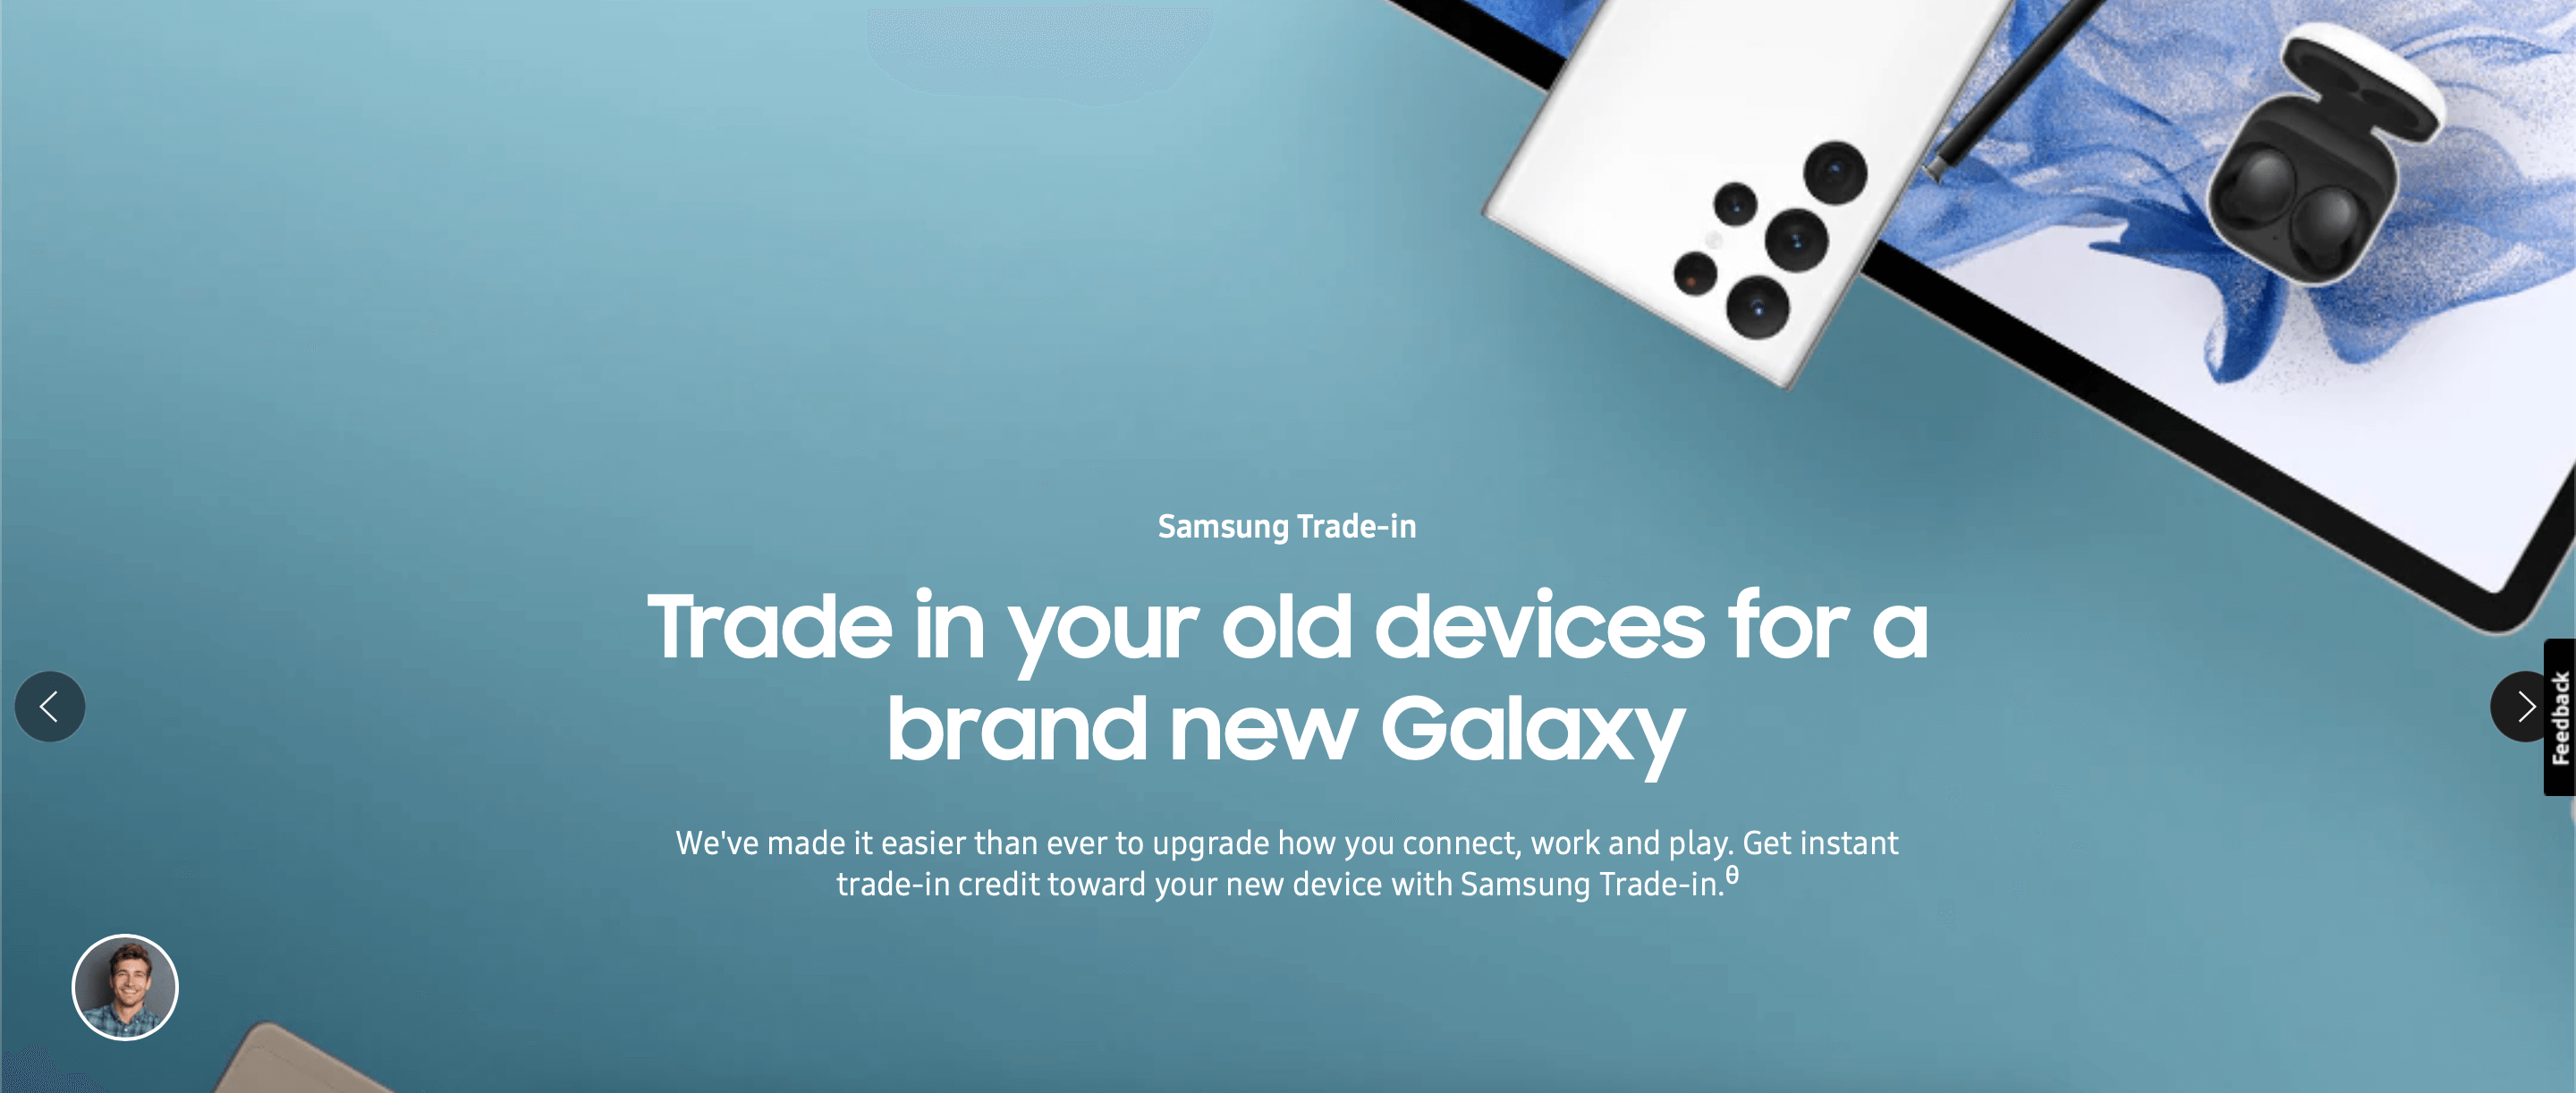 Samsung_trade_in_email_example